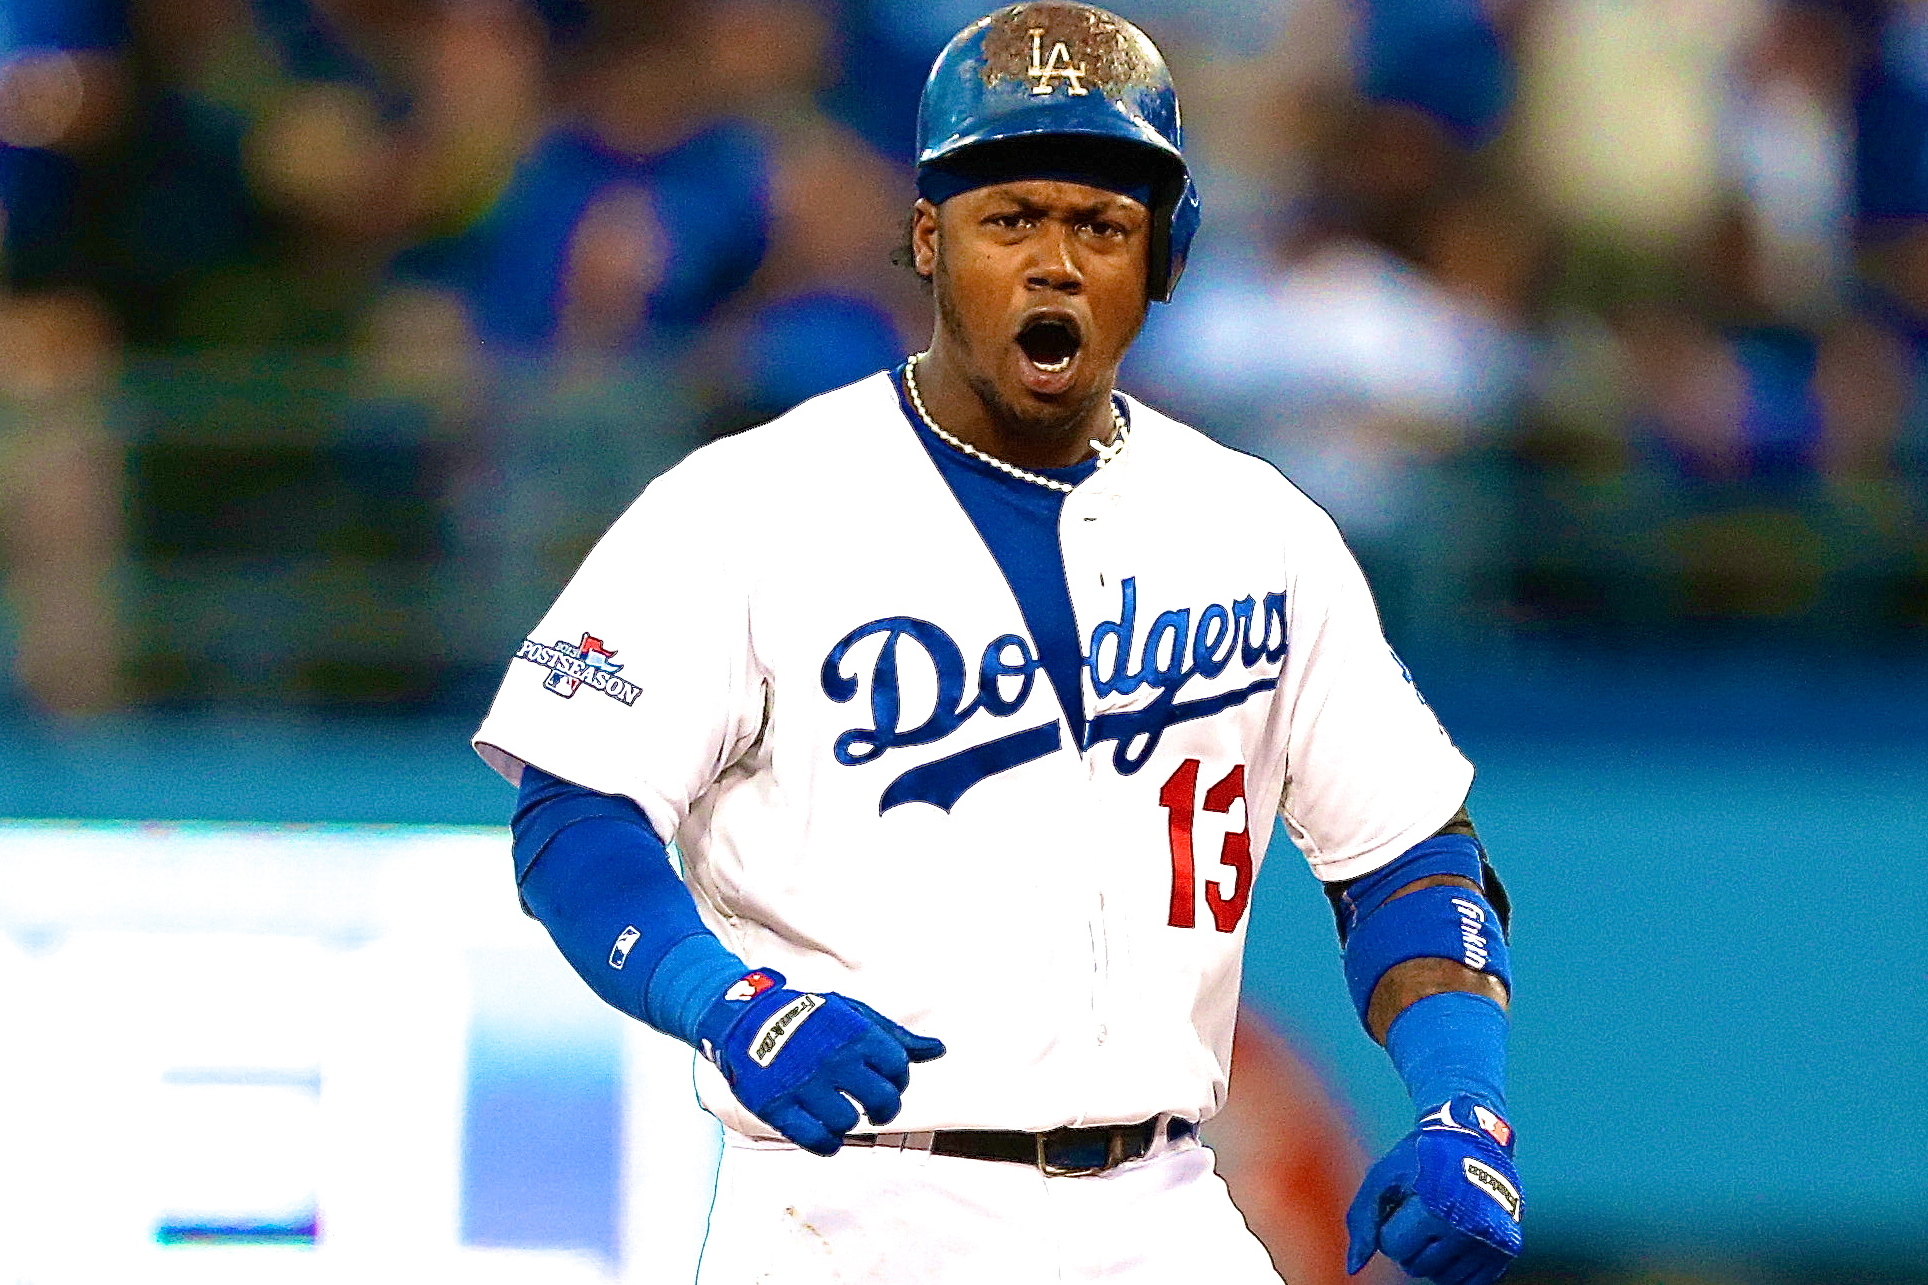 Do Manny and Hanley Ramirez really have identical swings? - Over